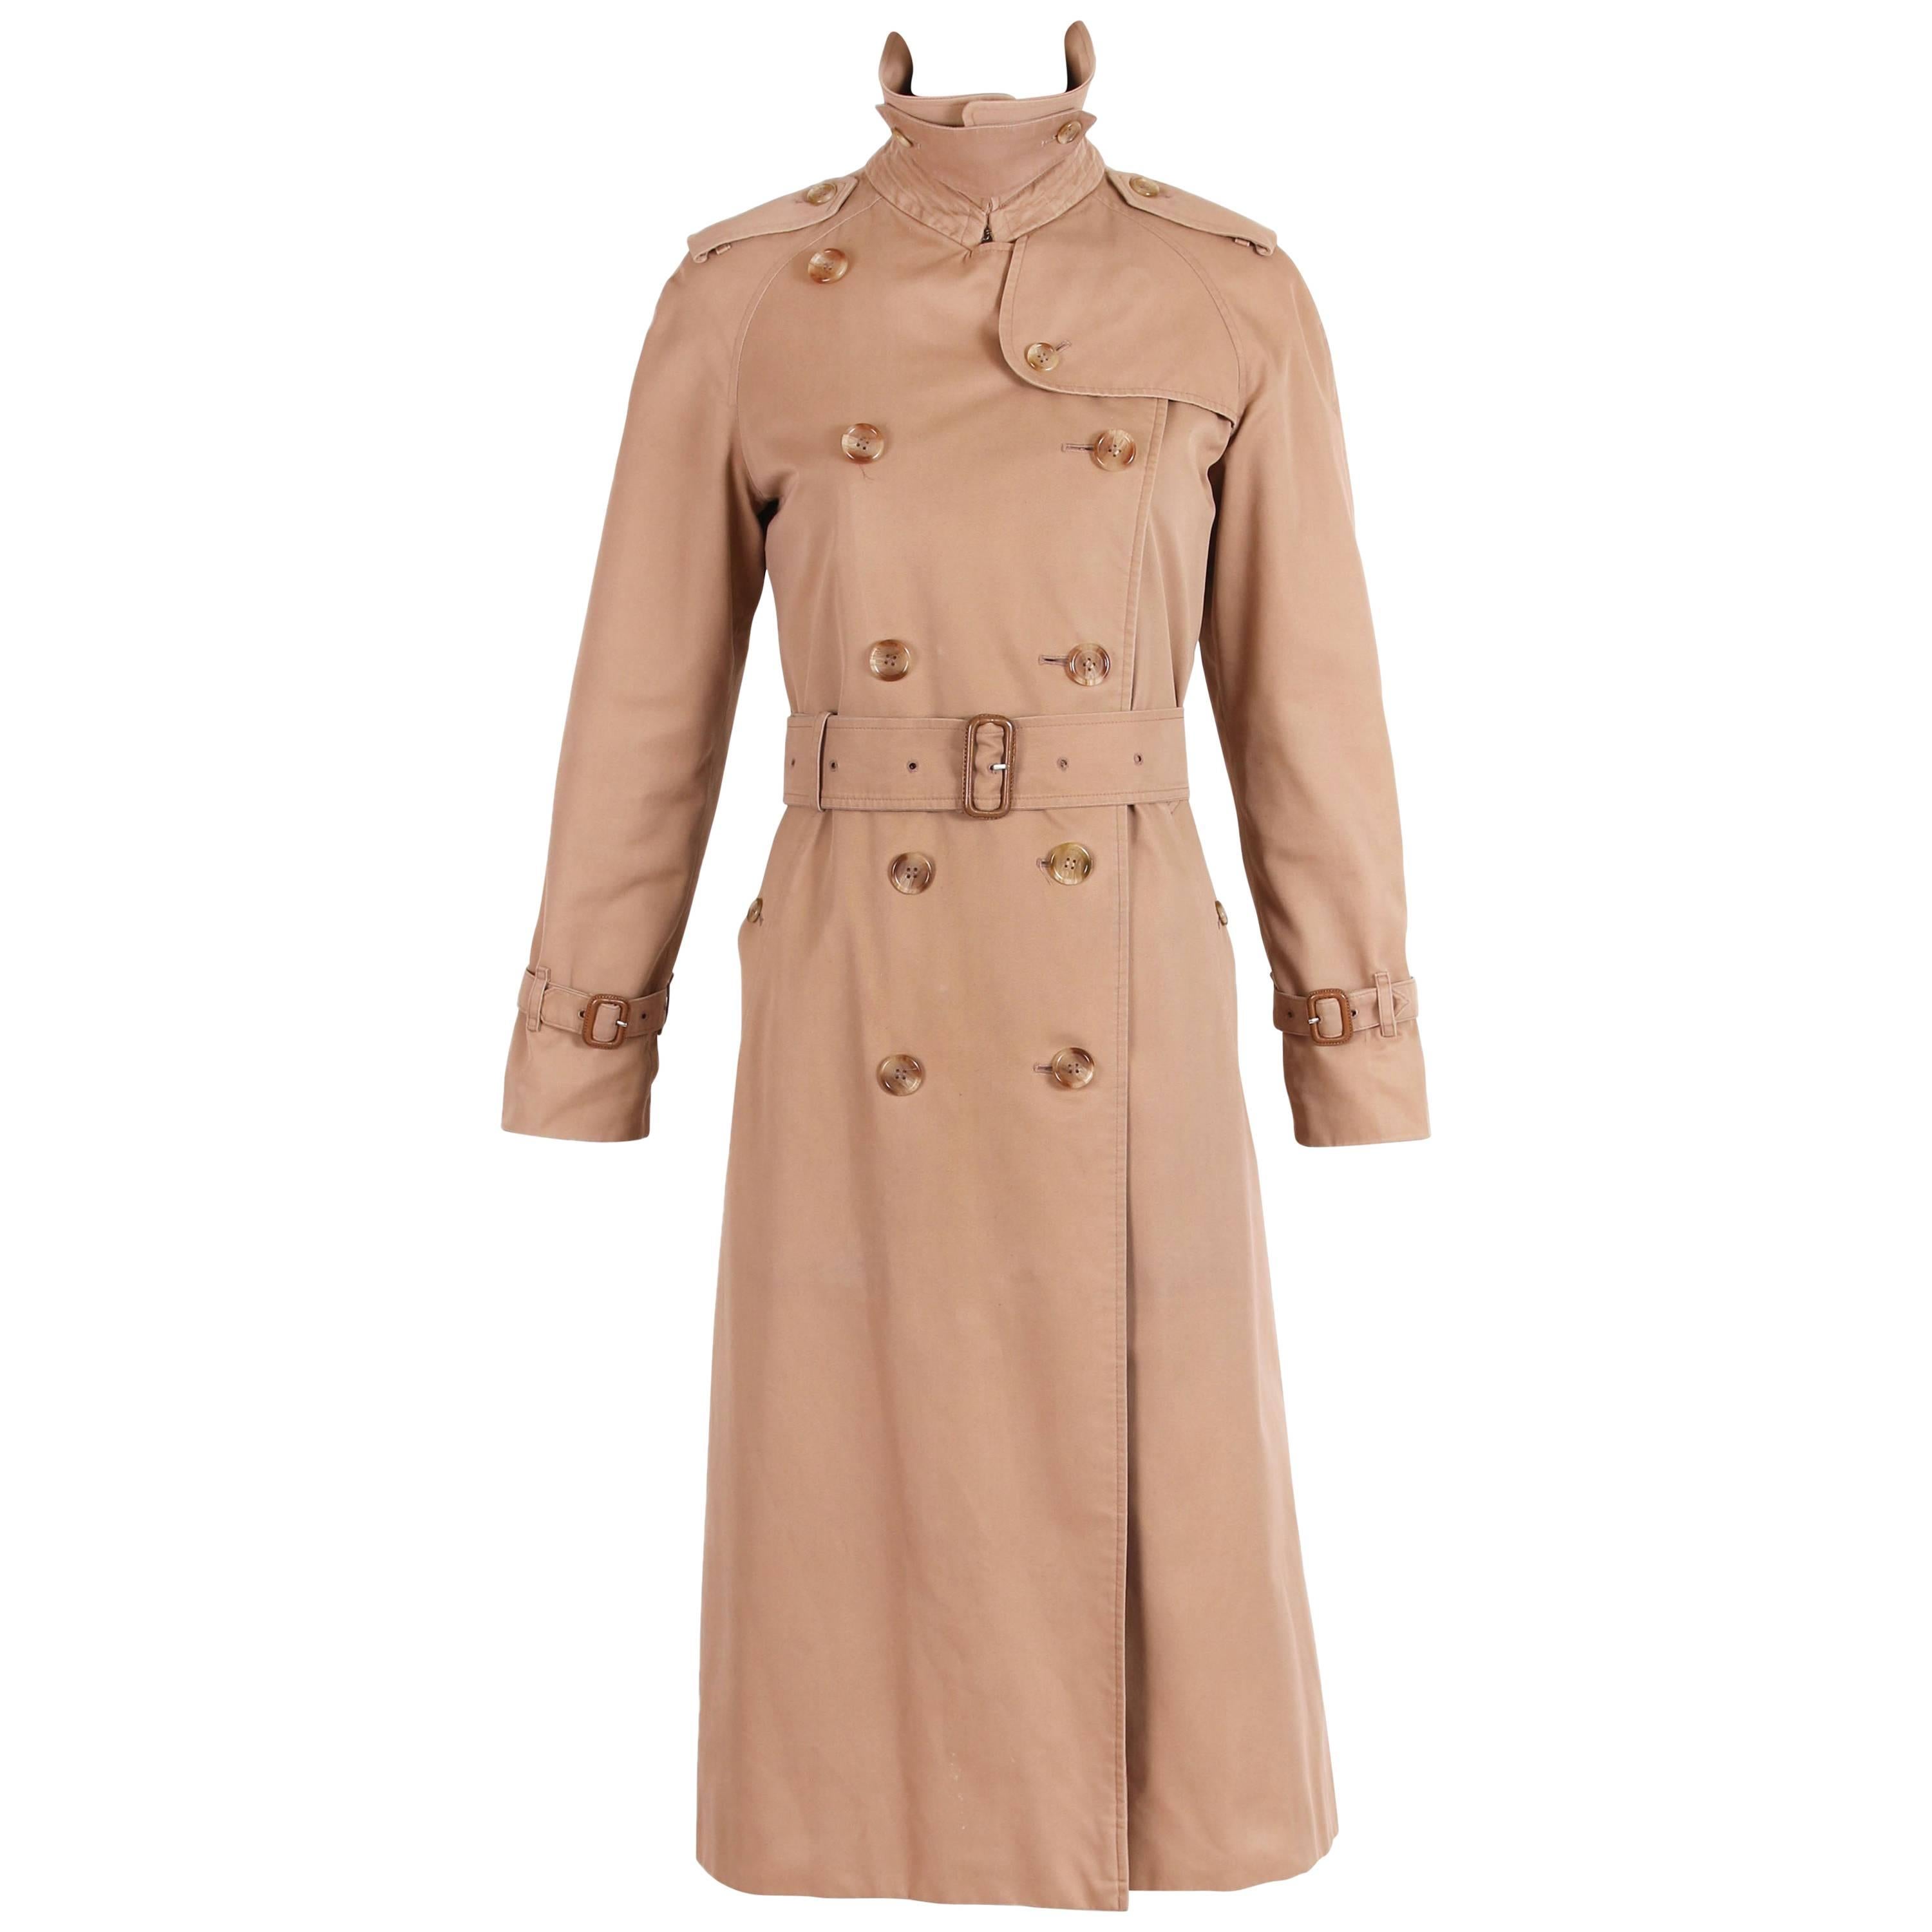 Burberry Trench Coat in Camel with Plaid Interior Lining